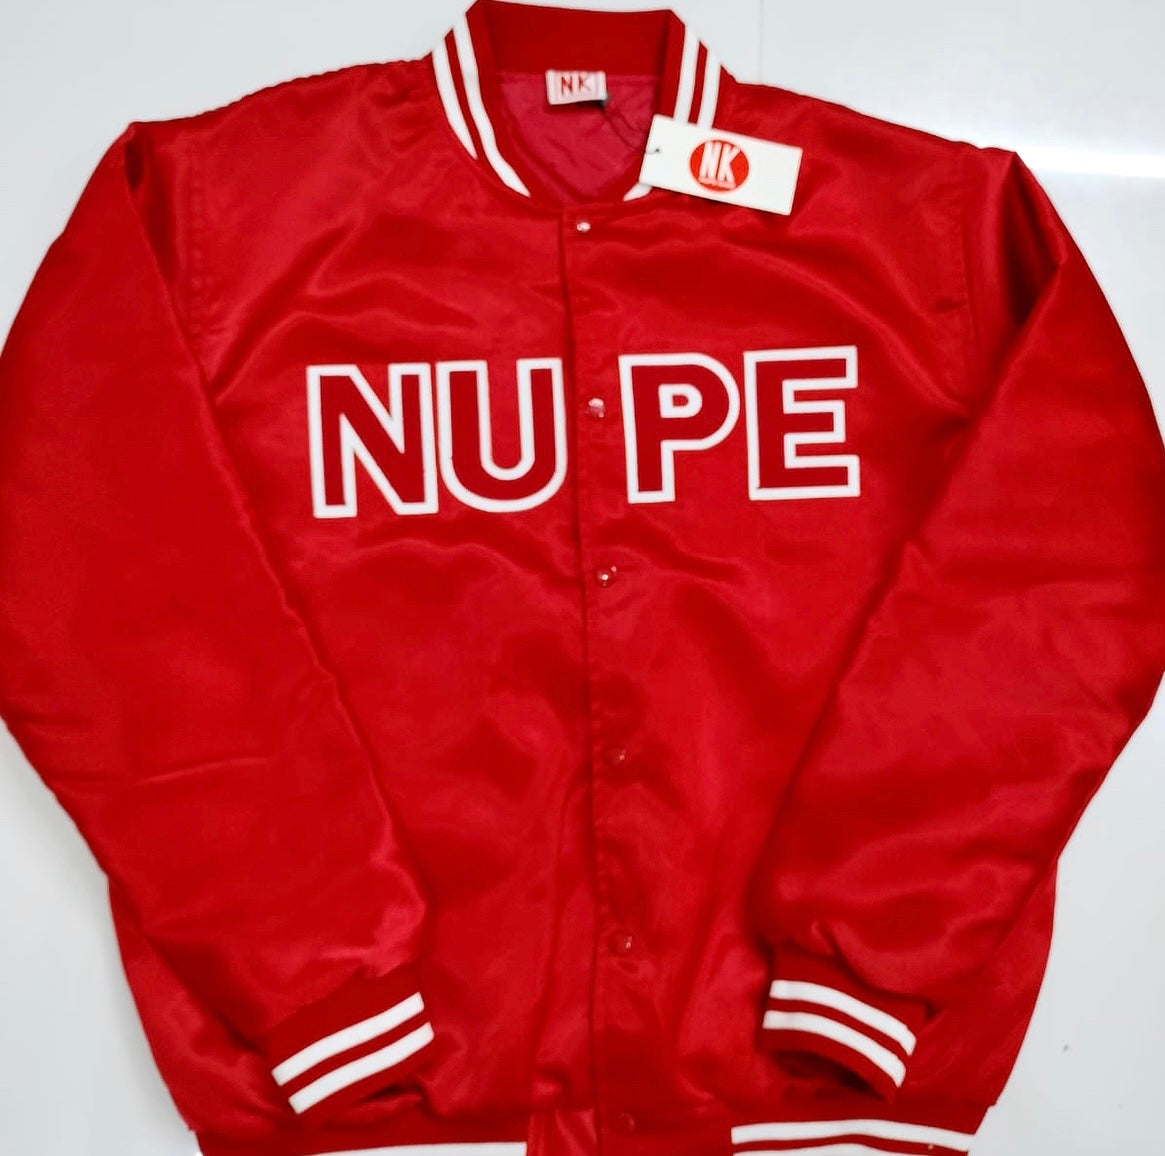 Check out our Kappa Alpha Psi satin jacket selection for the very best in unique design. This Kappa Alpha Psi Baseball Satin Jacket shows NUPE embroidered across the chest to create style and unique comfort in wear. Quality beyond imagination.